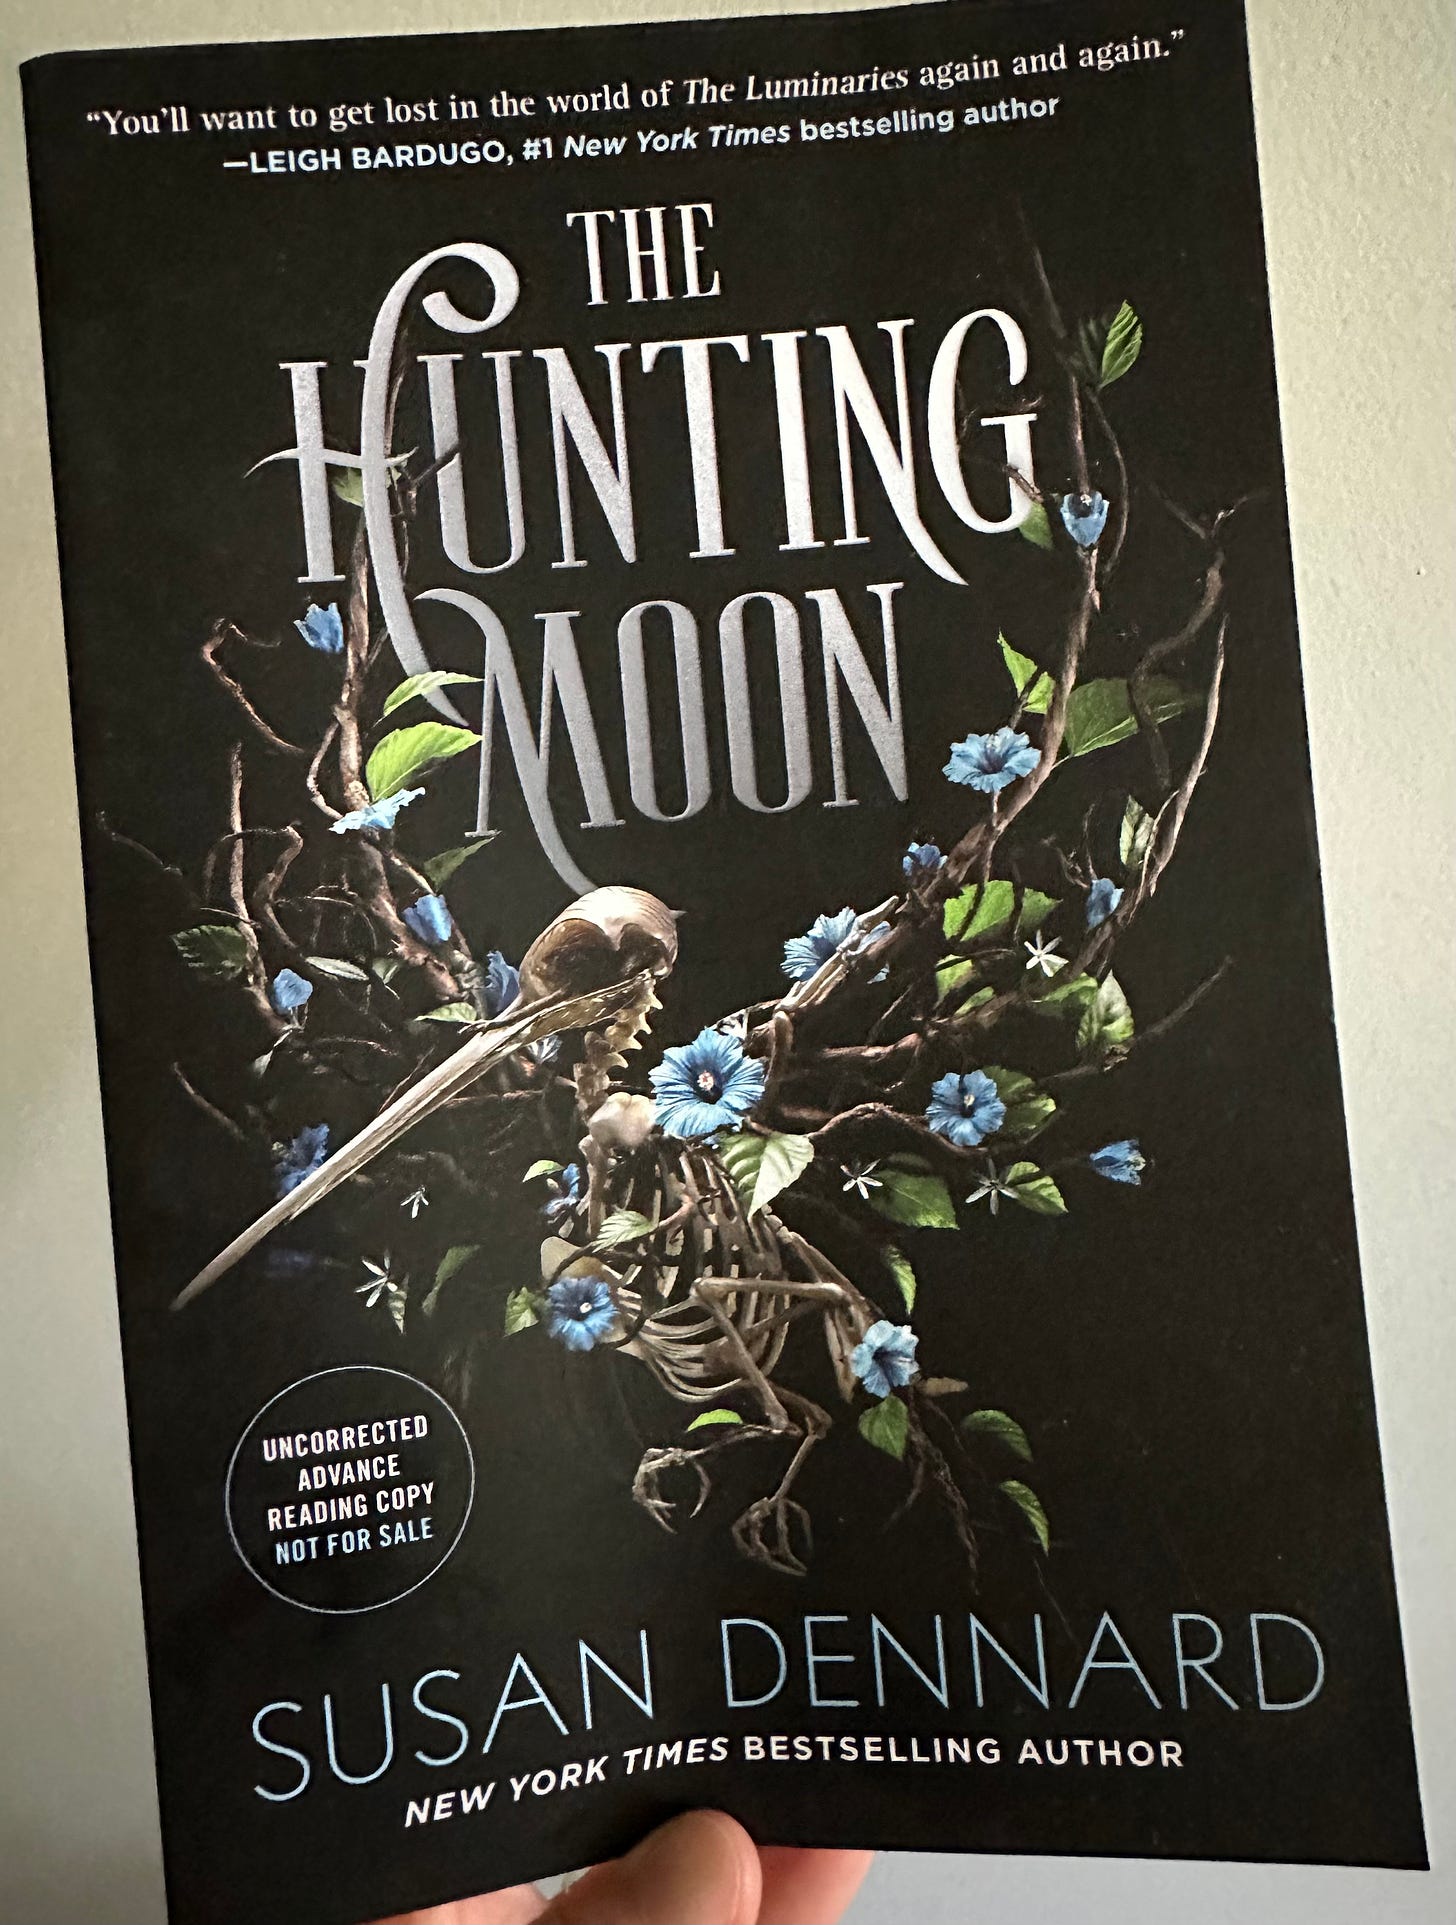 A photo of an advanced copy of the US edition of The Hunting Moon